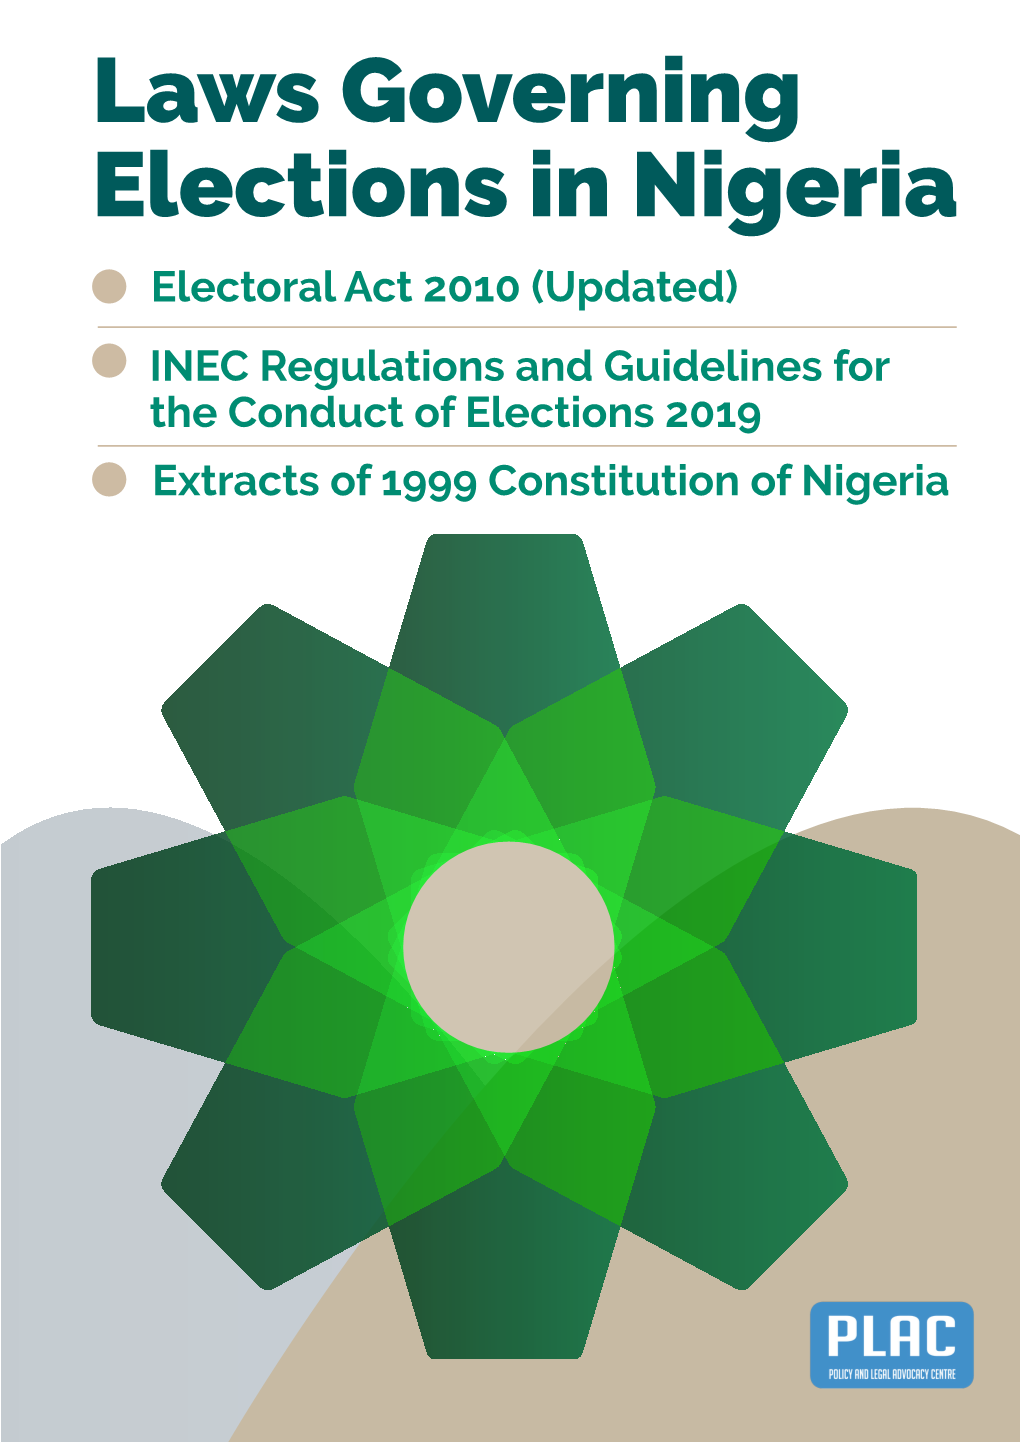 Laws Governing Elections in Nigeria